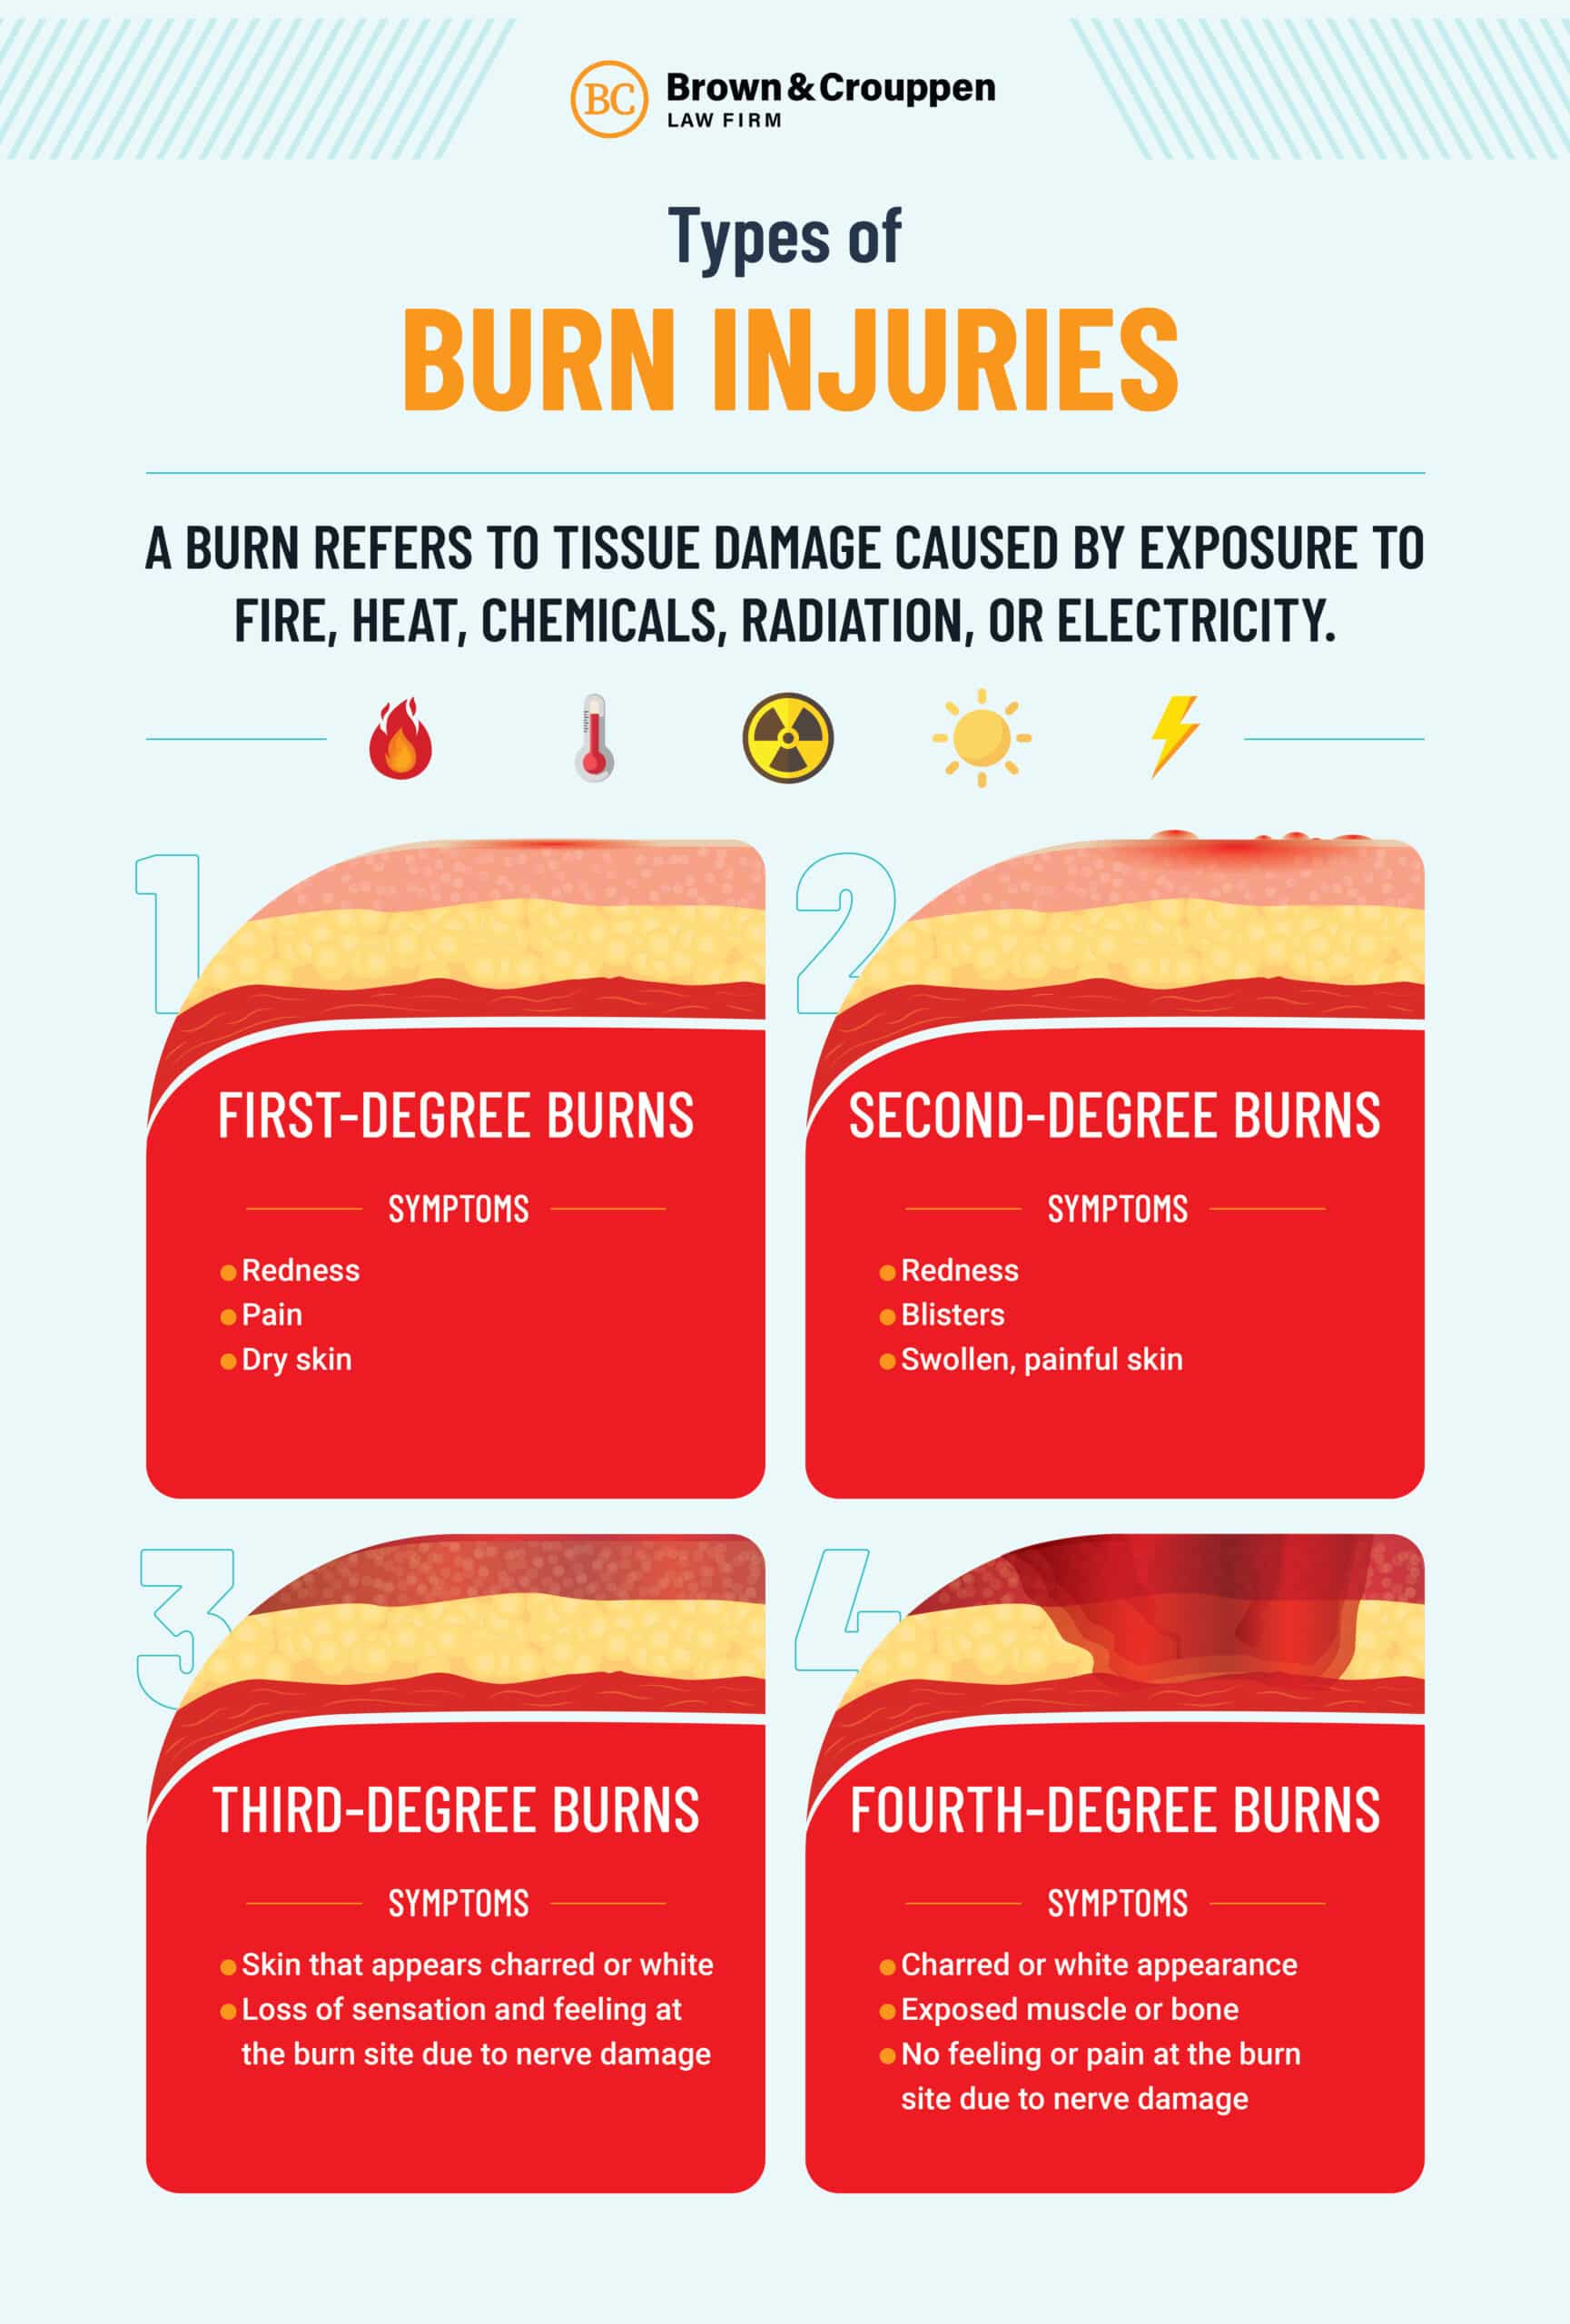 Infographic detailing the different types of burns from first to fourth degree